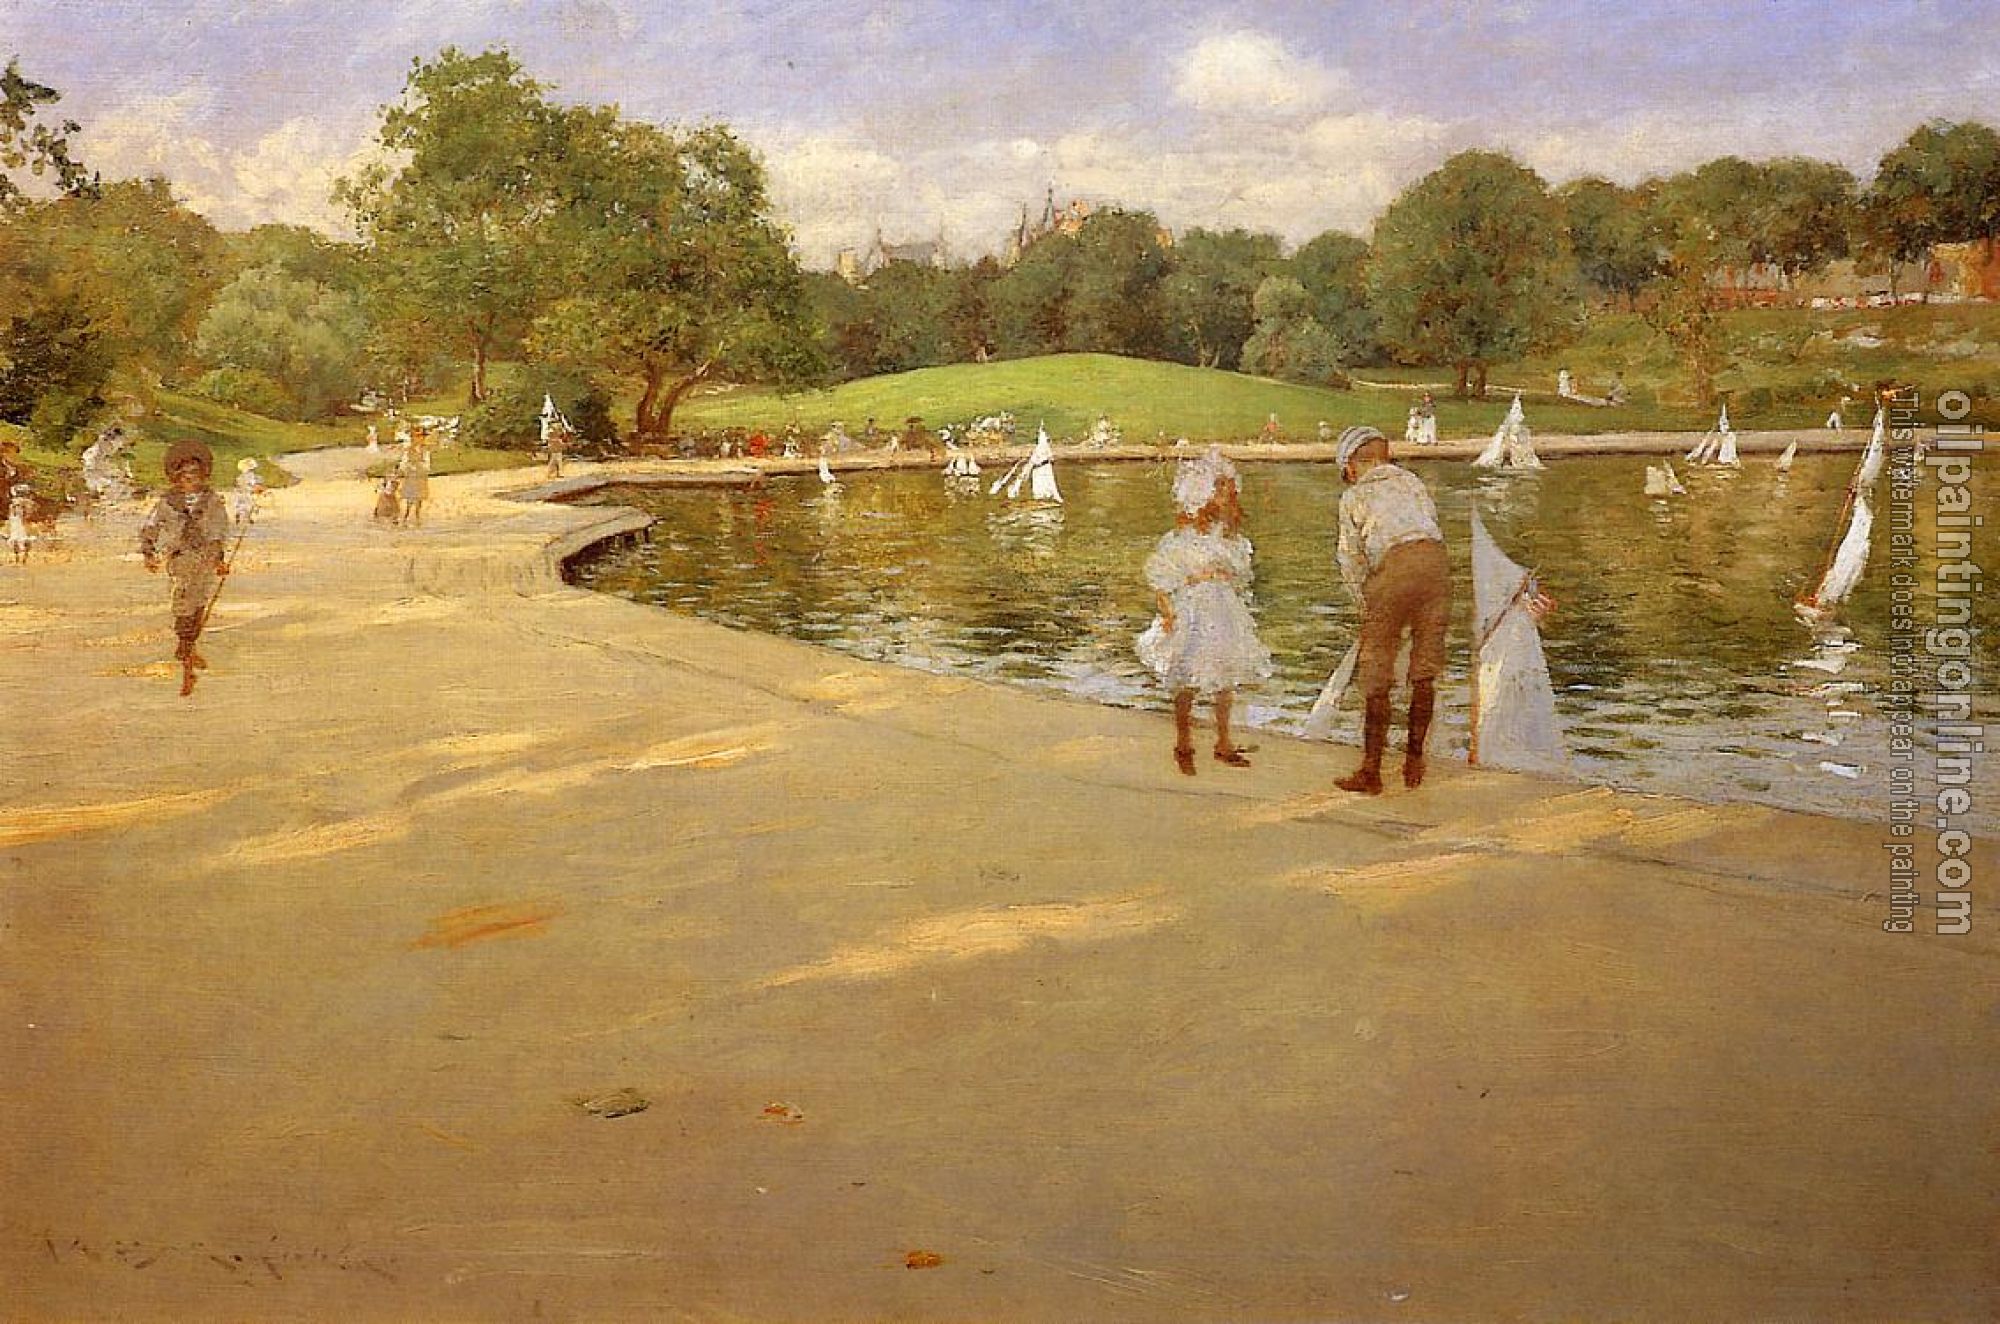 Chase, William Merritt - The Lake for Miniature Yachts aka Central Park